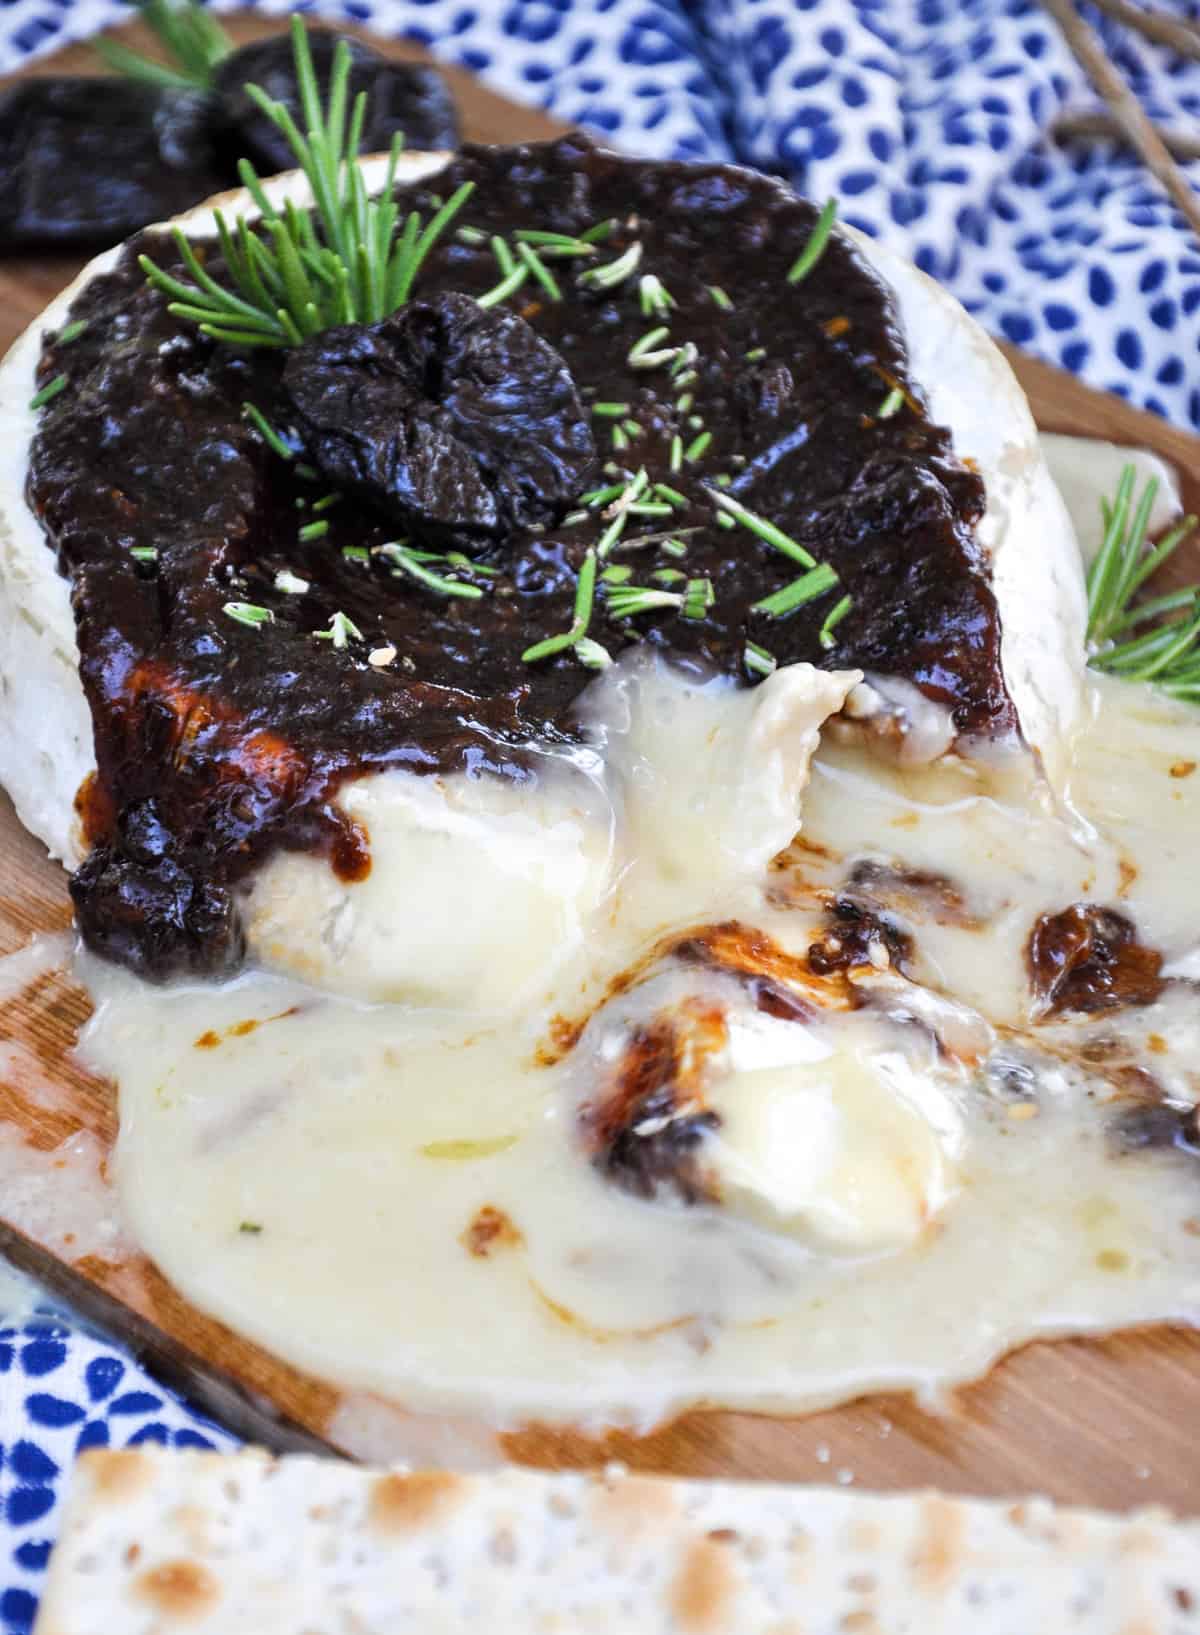 You Can Grill Cheese! Cedar Planked Brie with Prune Rosemary Sauce